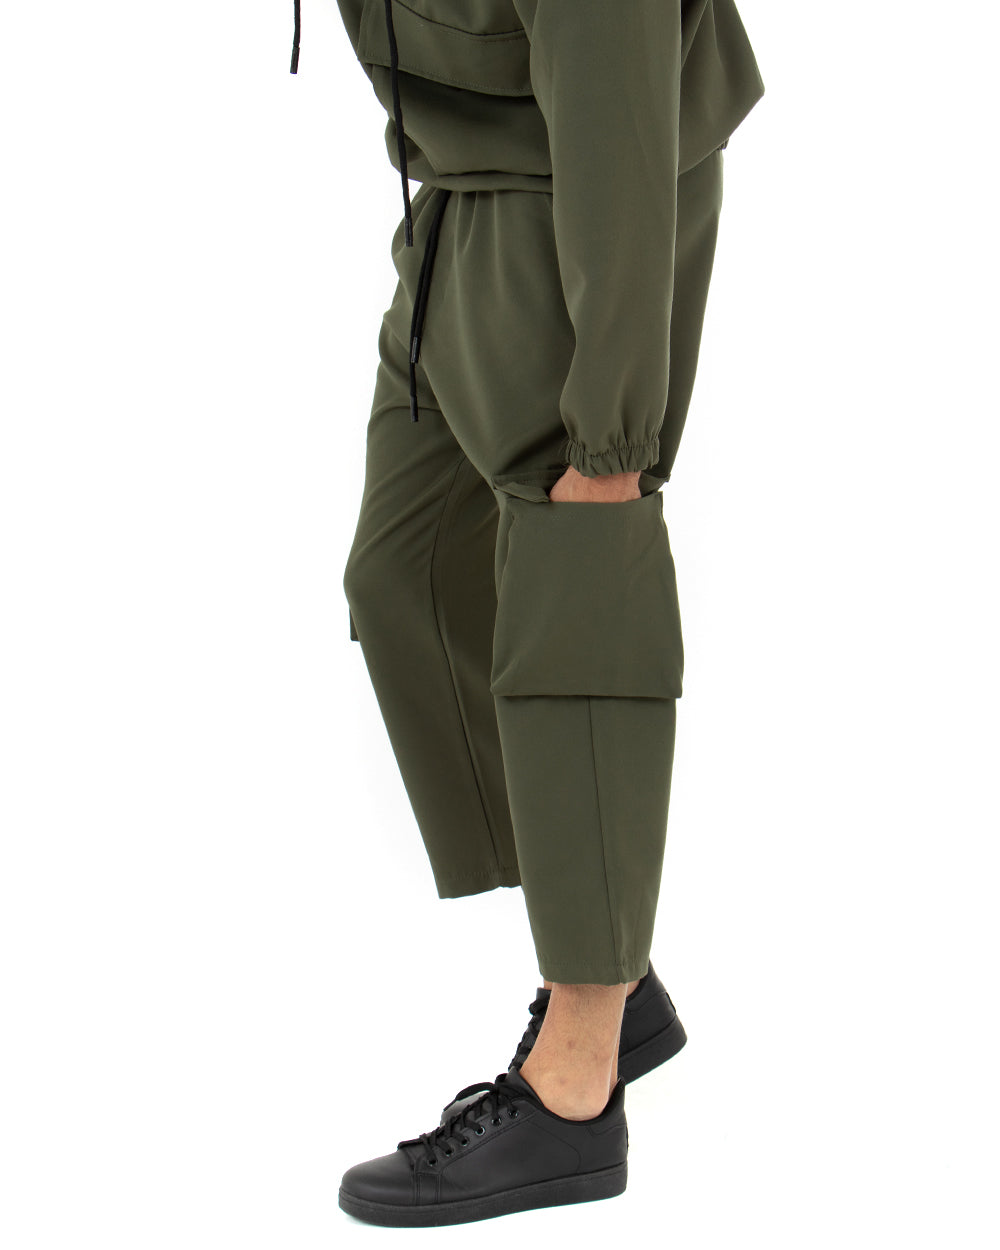 Complete Men's Tracksuit Viscose Green Relaxed Fit Hooded Sweatshirt Cargo Pants GIOSAL-OU1844A